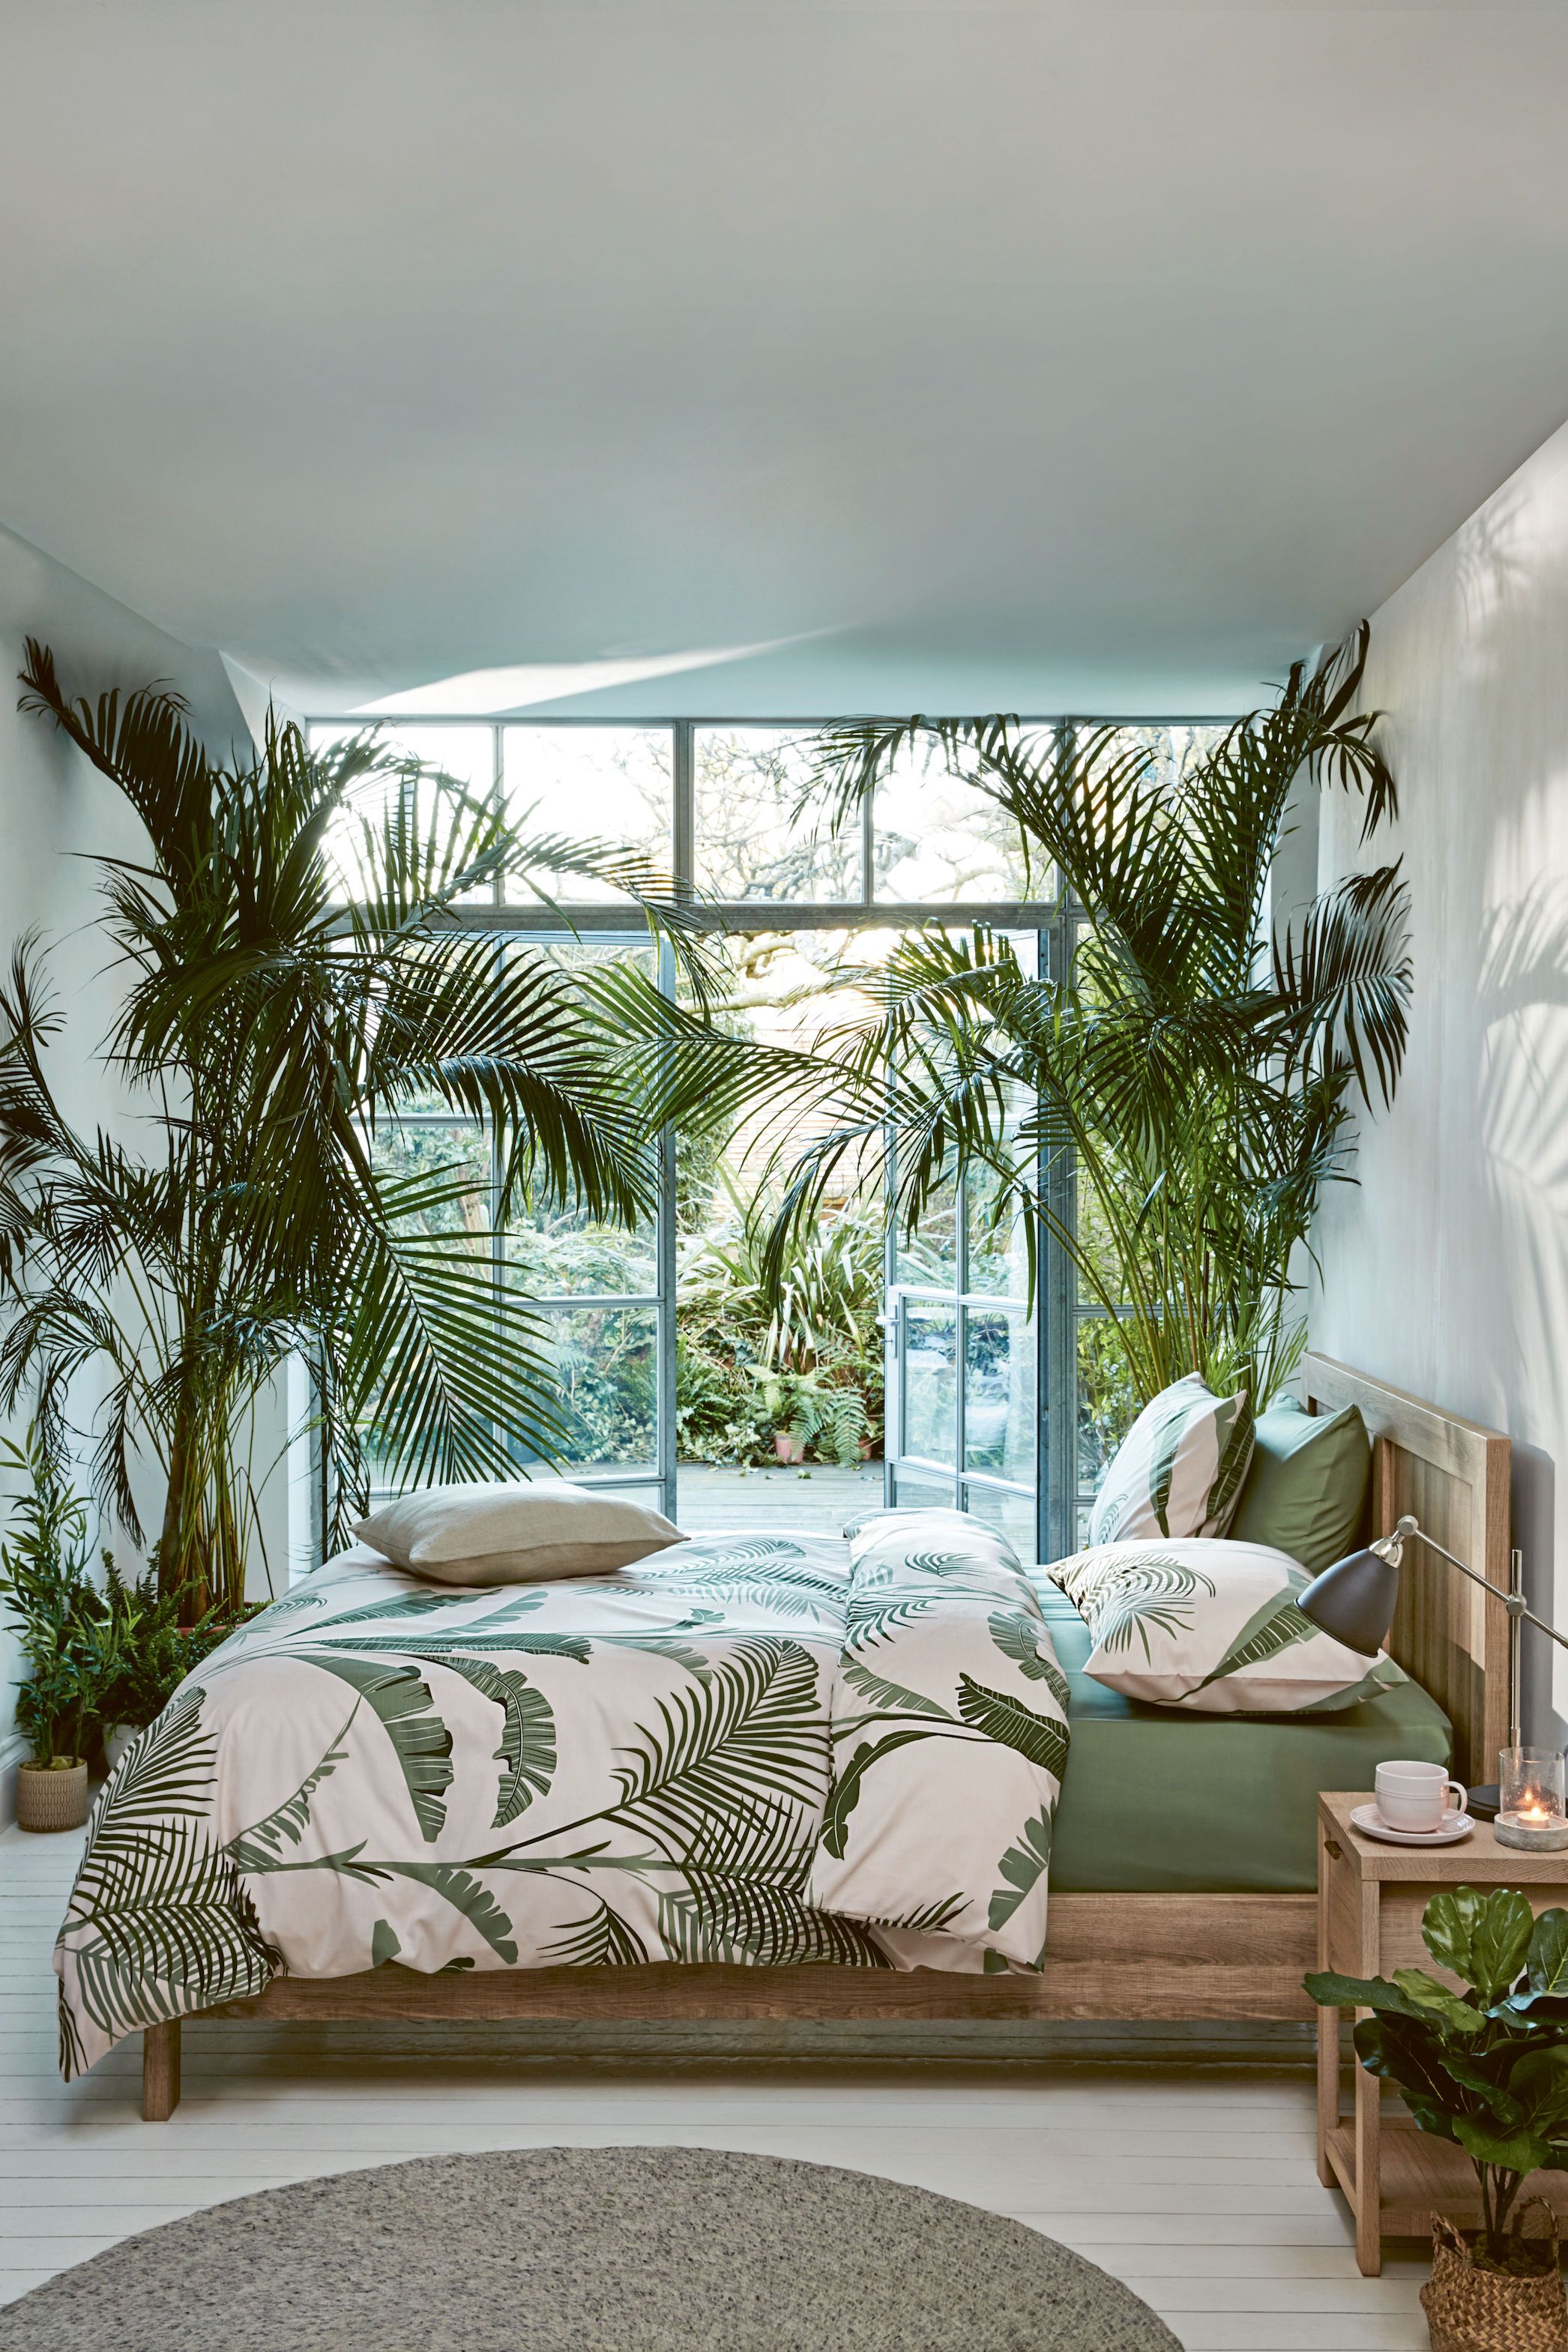 Marks & Spencer's Palm Print Tropical Bedding Set Back In Stock